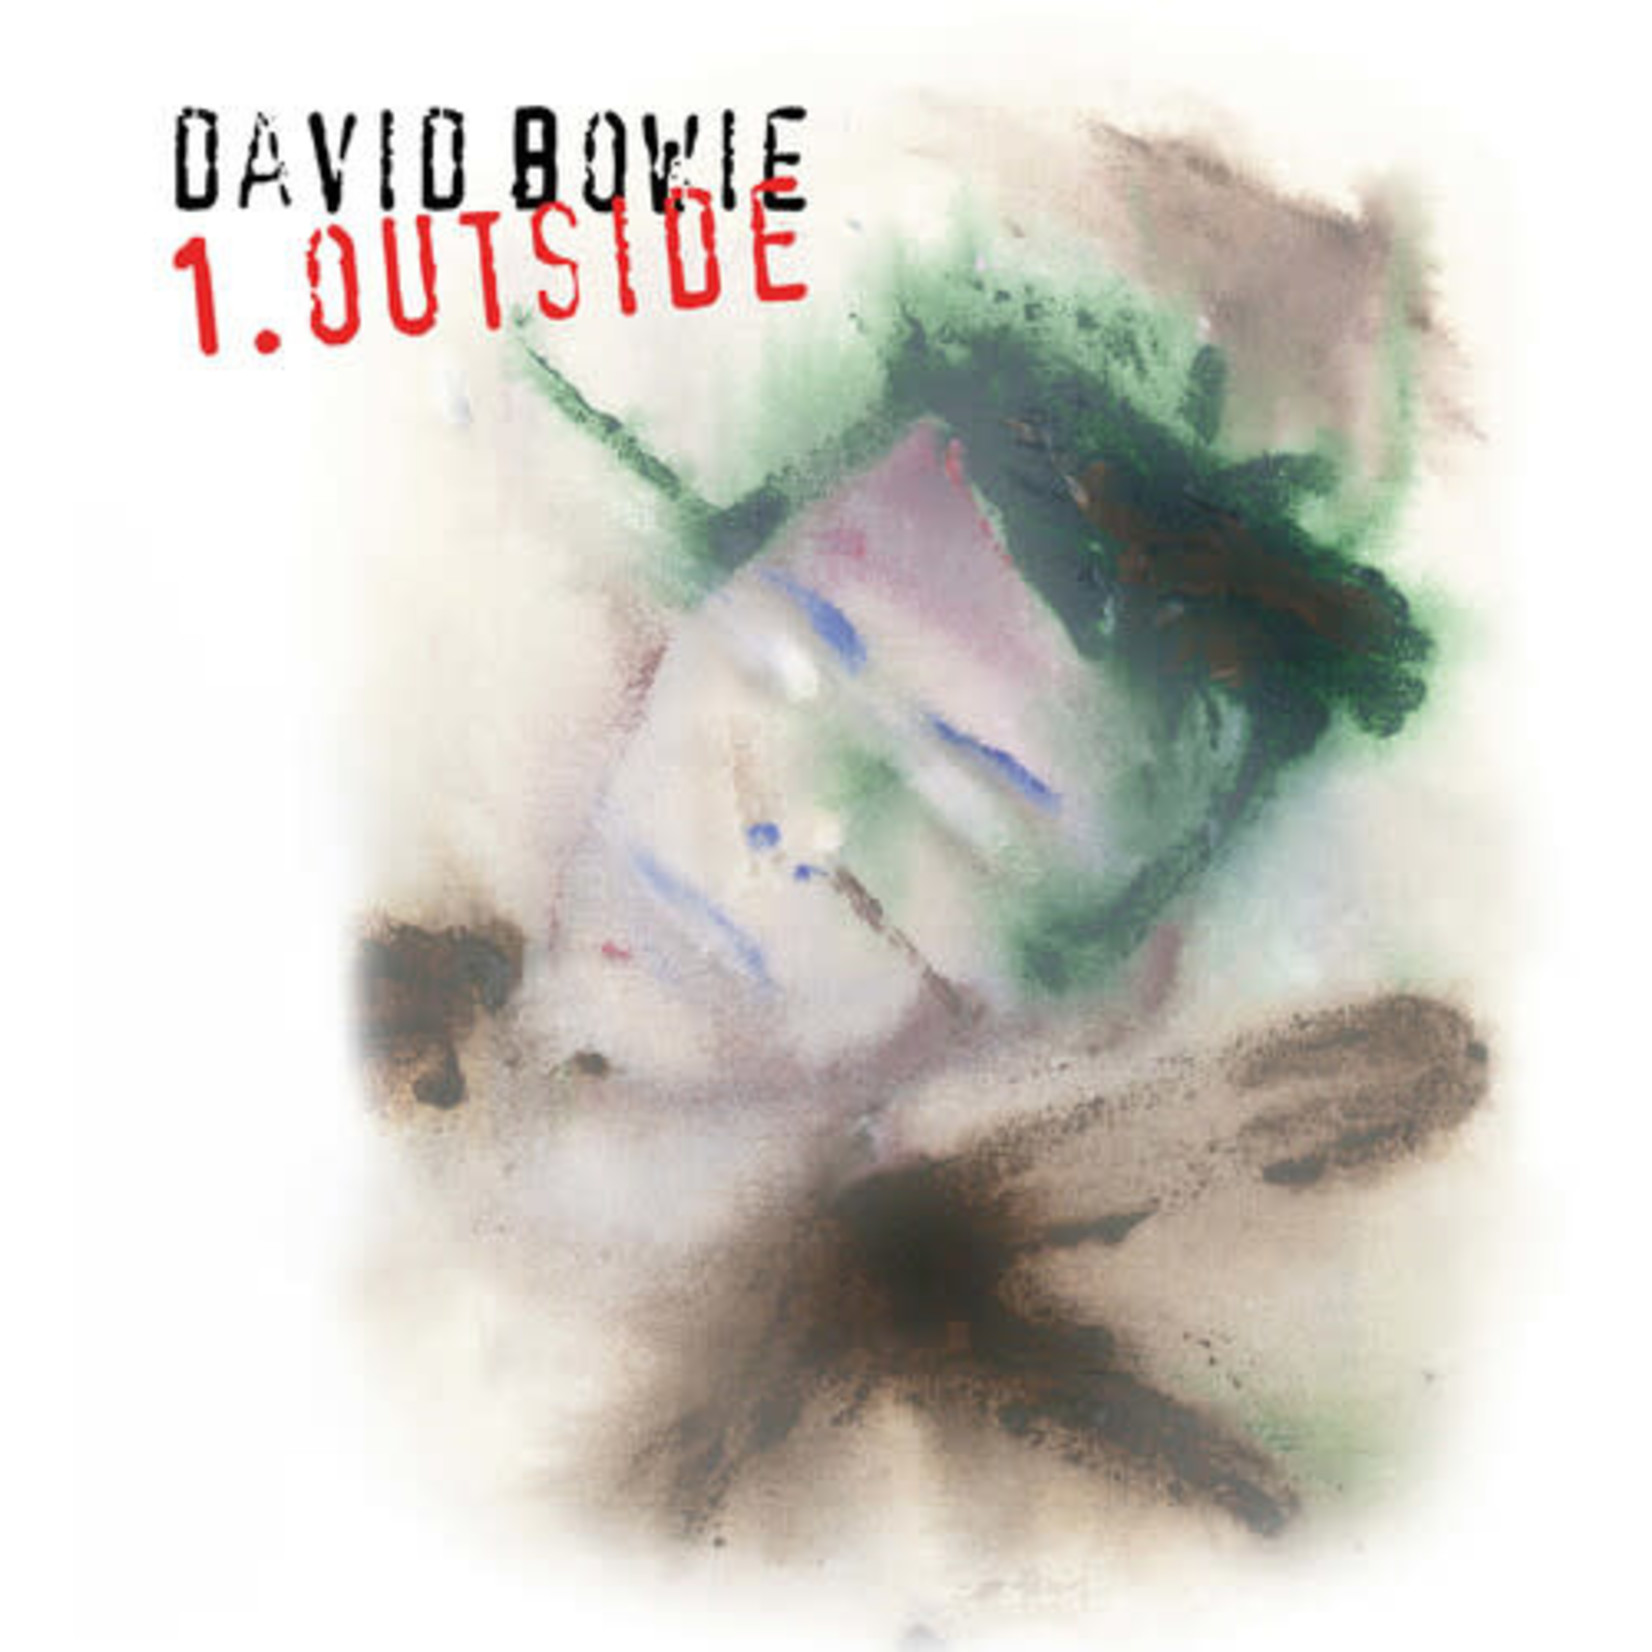 David Bowie - 1. Outside (The Nathan Adler Diaries: A Hyper Cycle) [2LP]